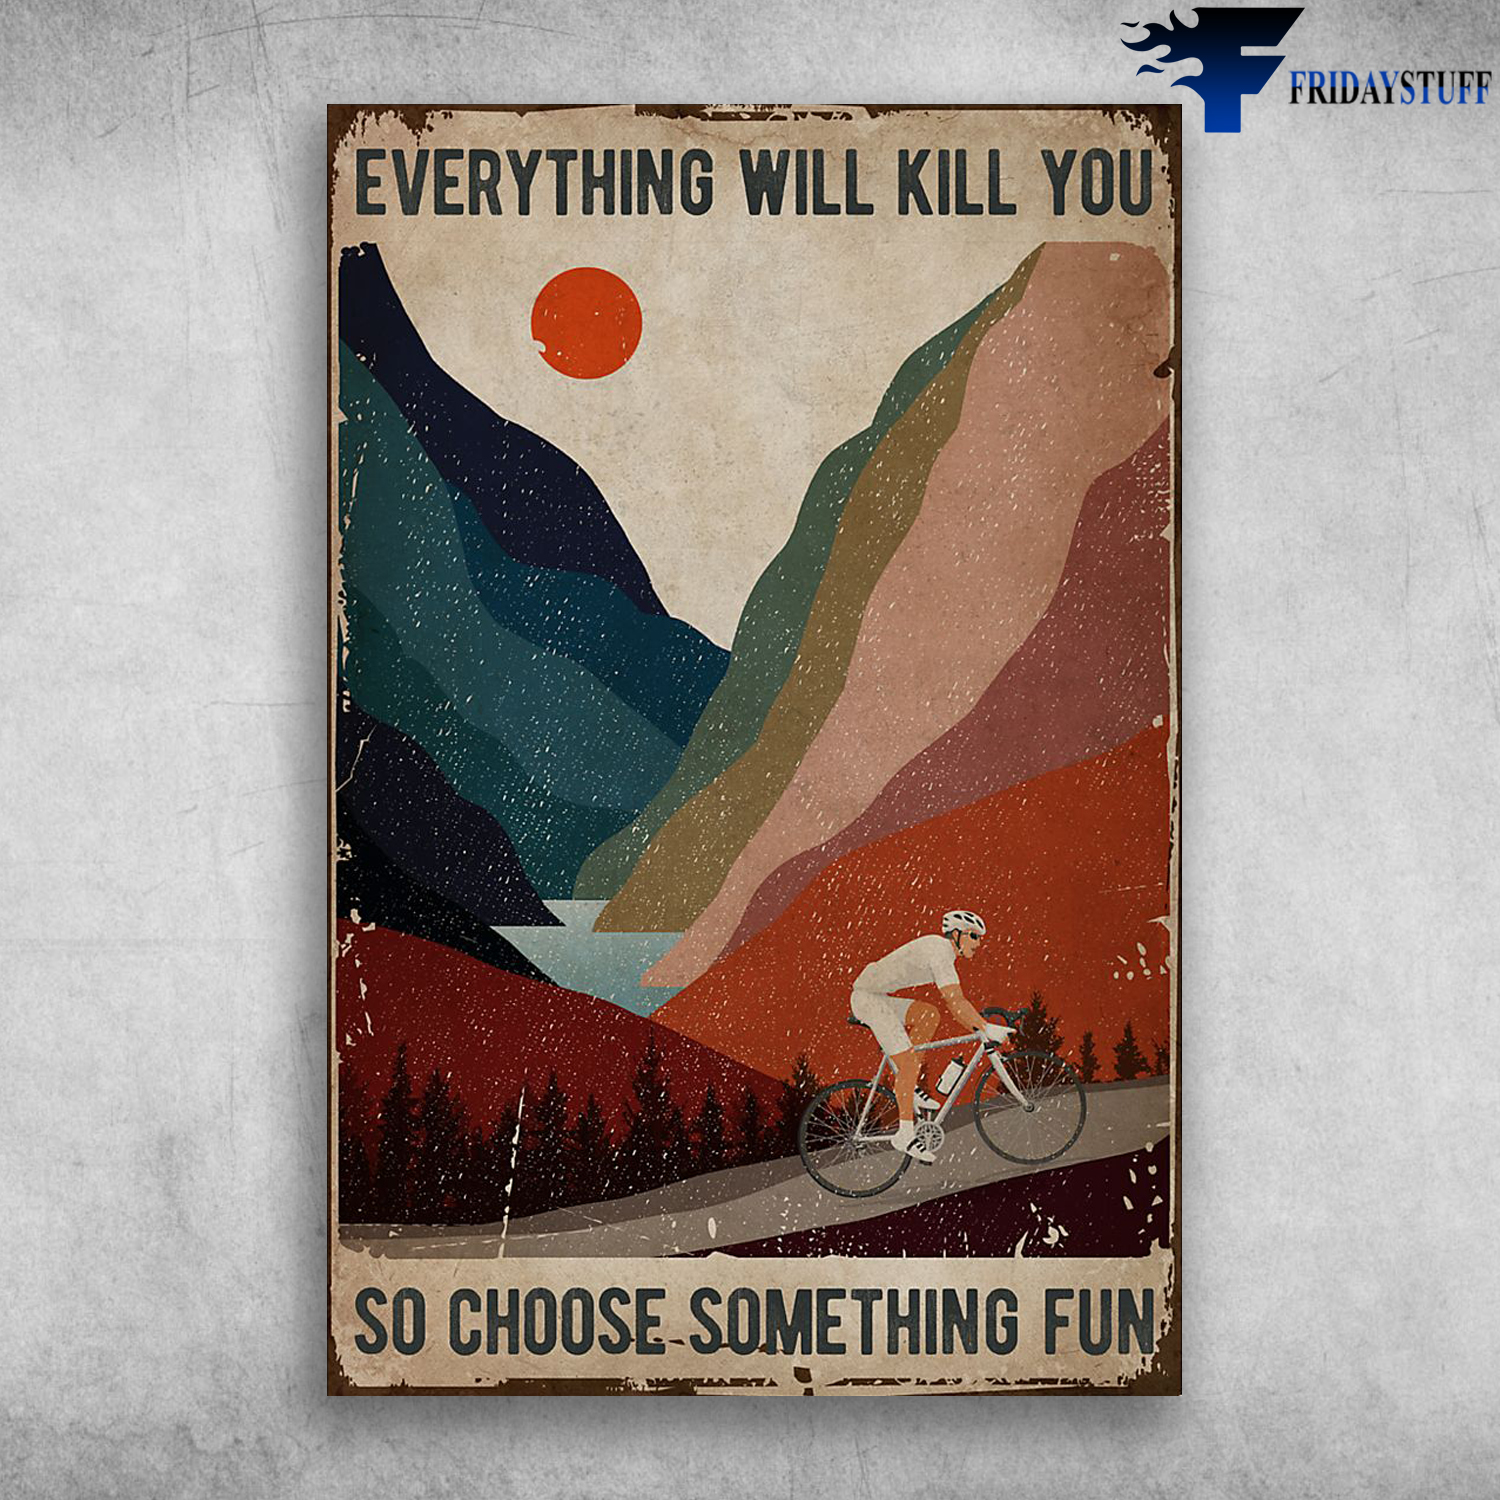 The Man Riding Bikecycle On The Mountain - Everything Will Kill You So Choose Something Fun